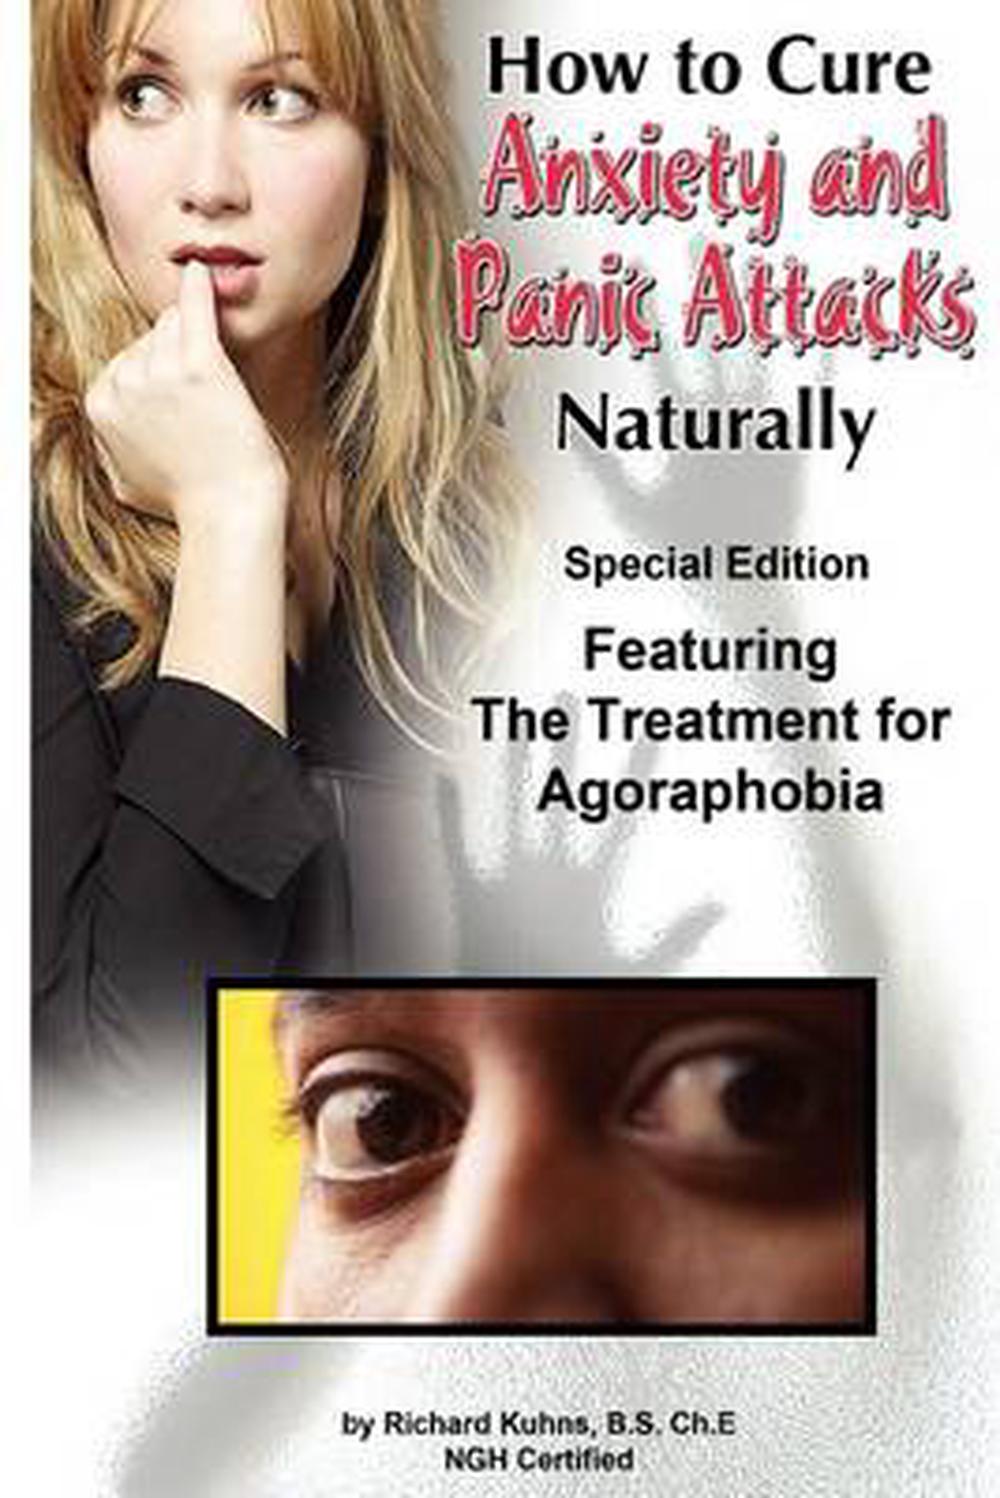 How to Cure Anxiety and Panic Attacks Naturally: